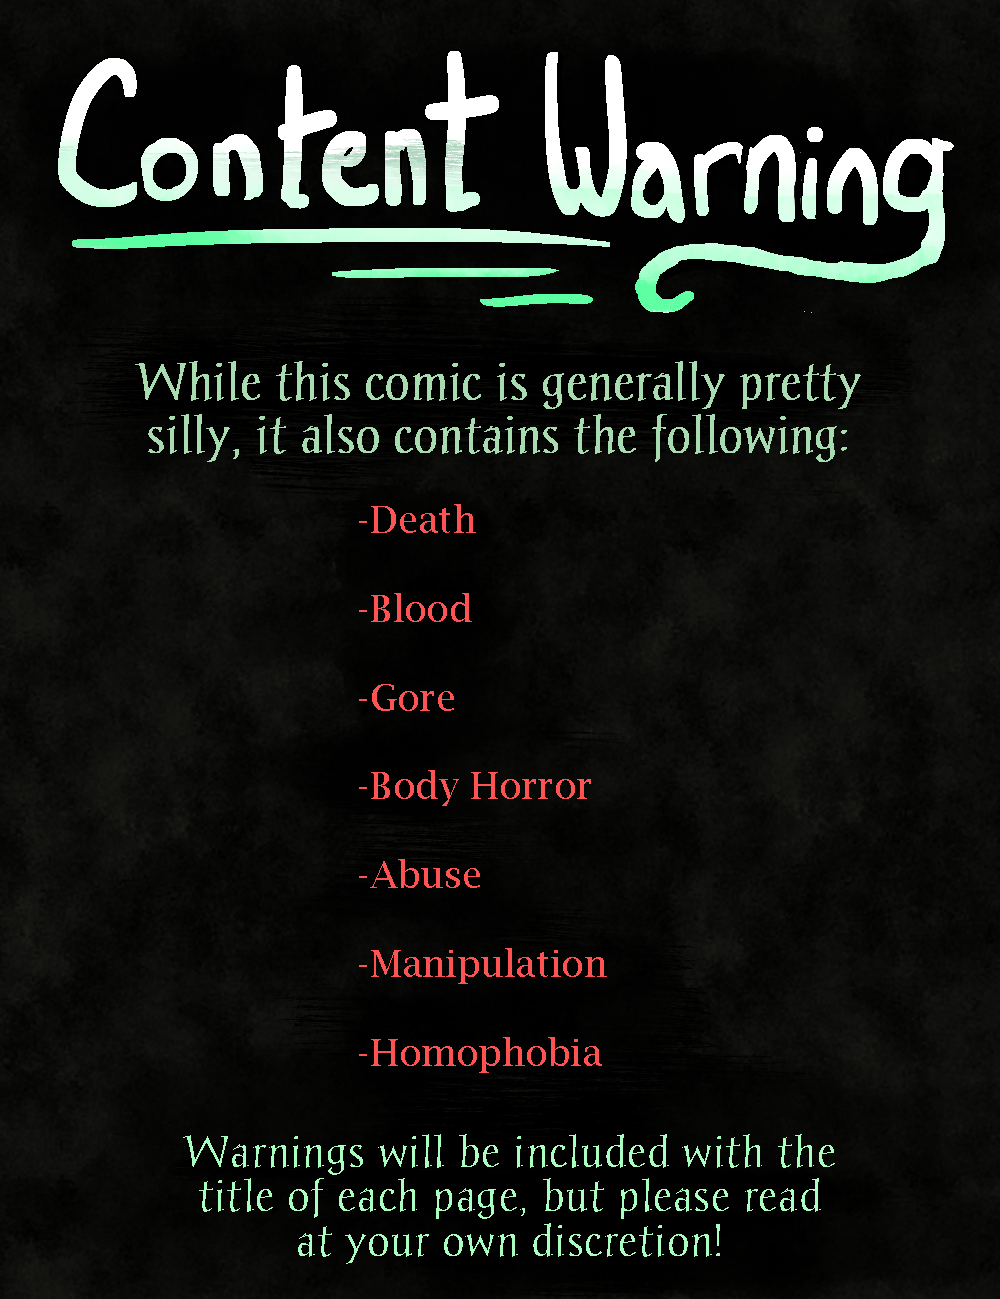 Content Warnings